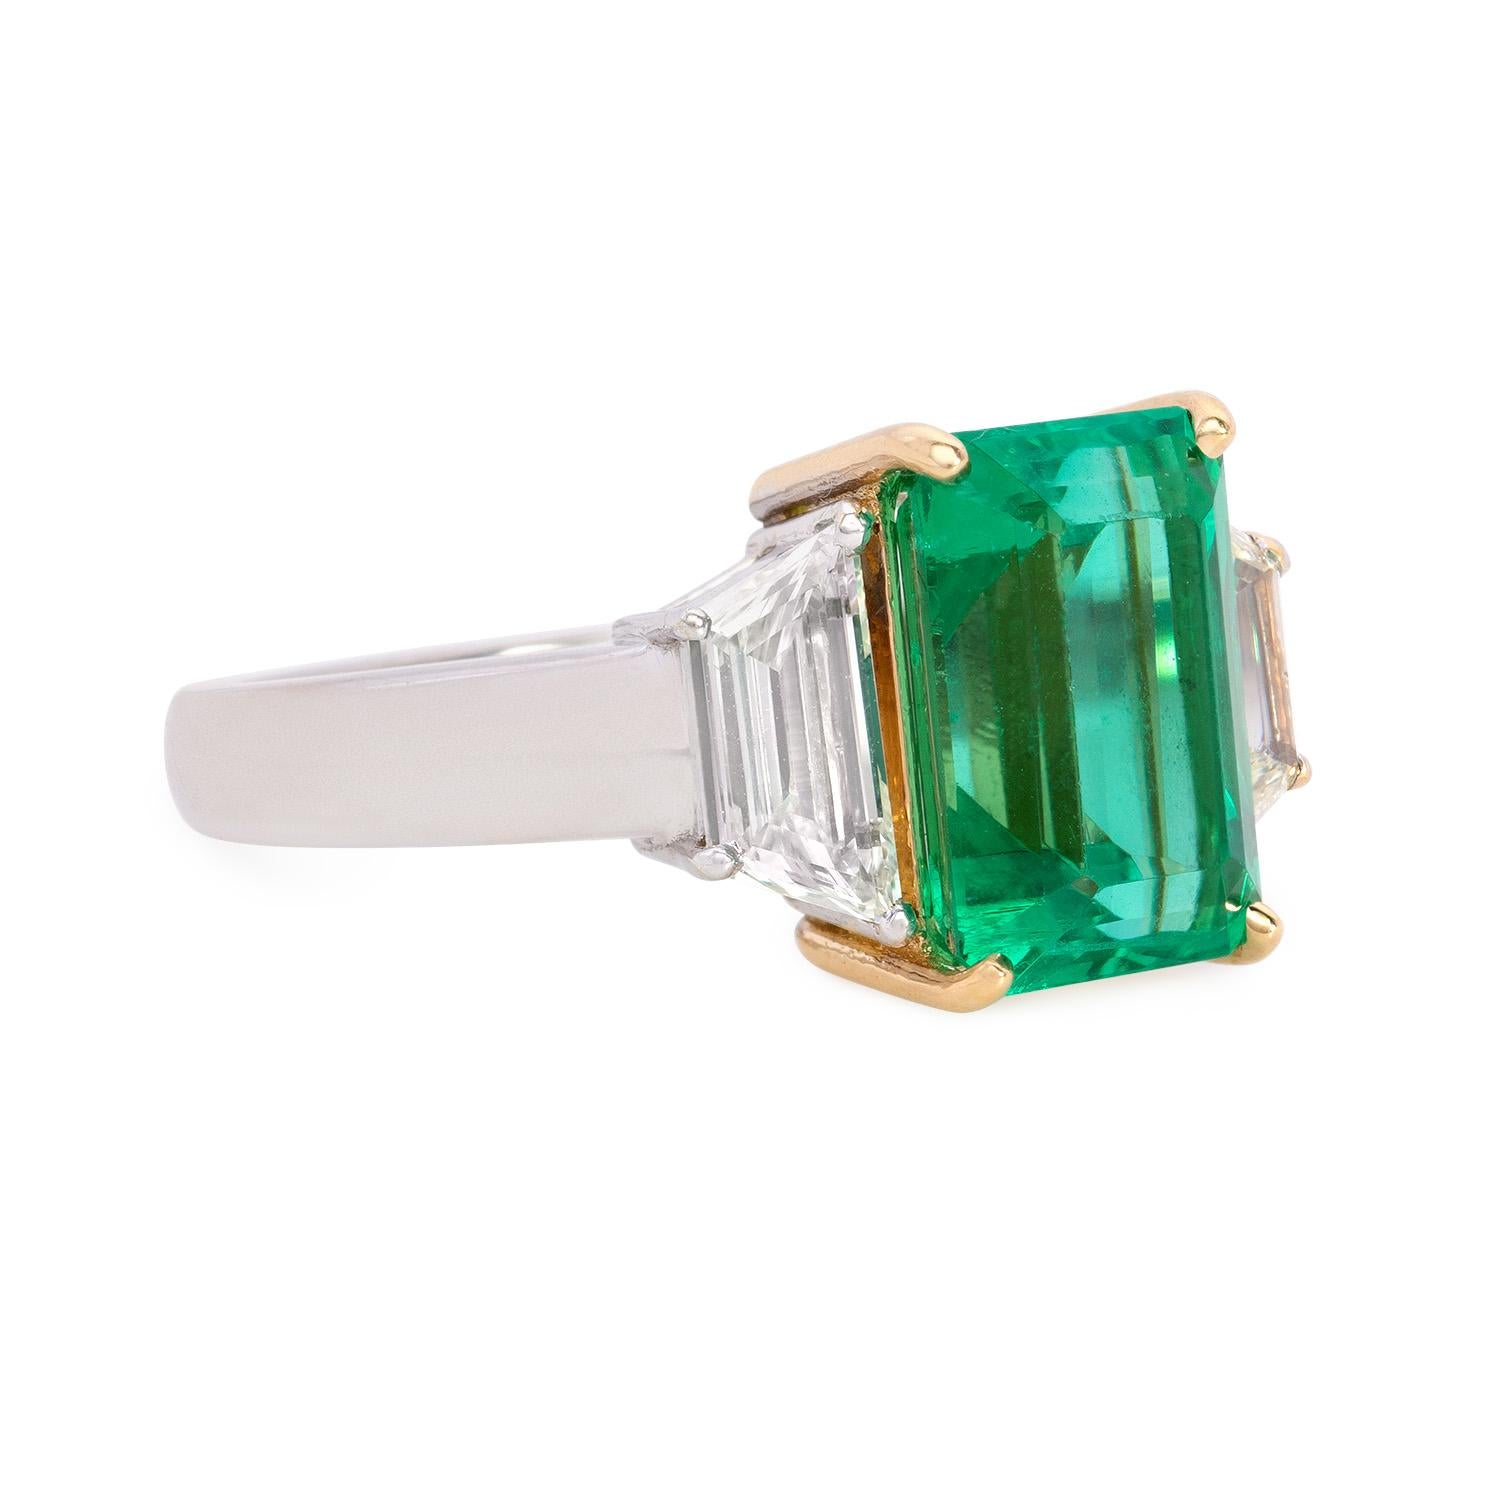 Introducing this natural Emerald and diamond ring, a stunning and luxurious piece of jewelry. The centerpiece of the ring is a large, high-quality, 3.84 carat emerald, which exhibits a captivating vibrant green color, a perfect specimen of an